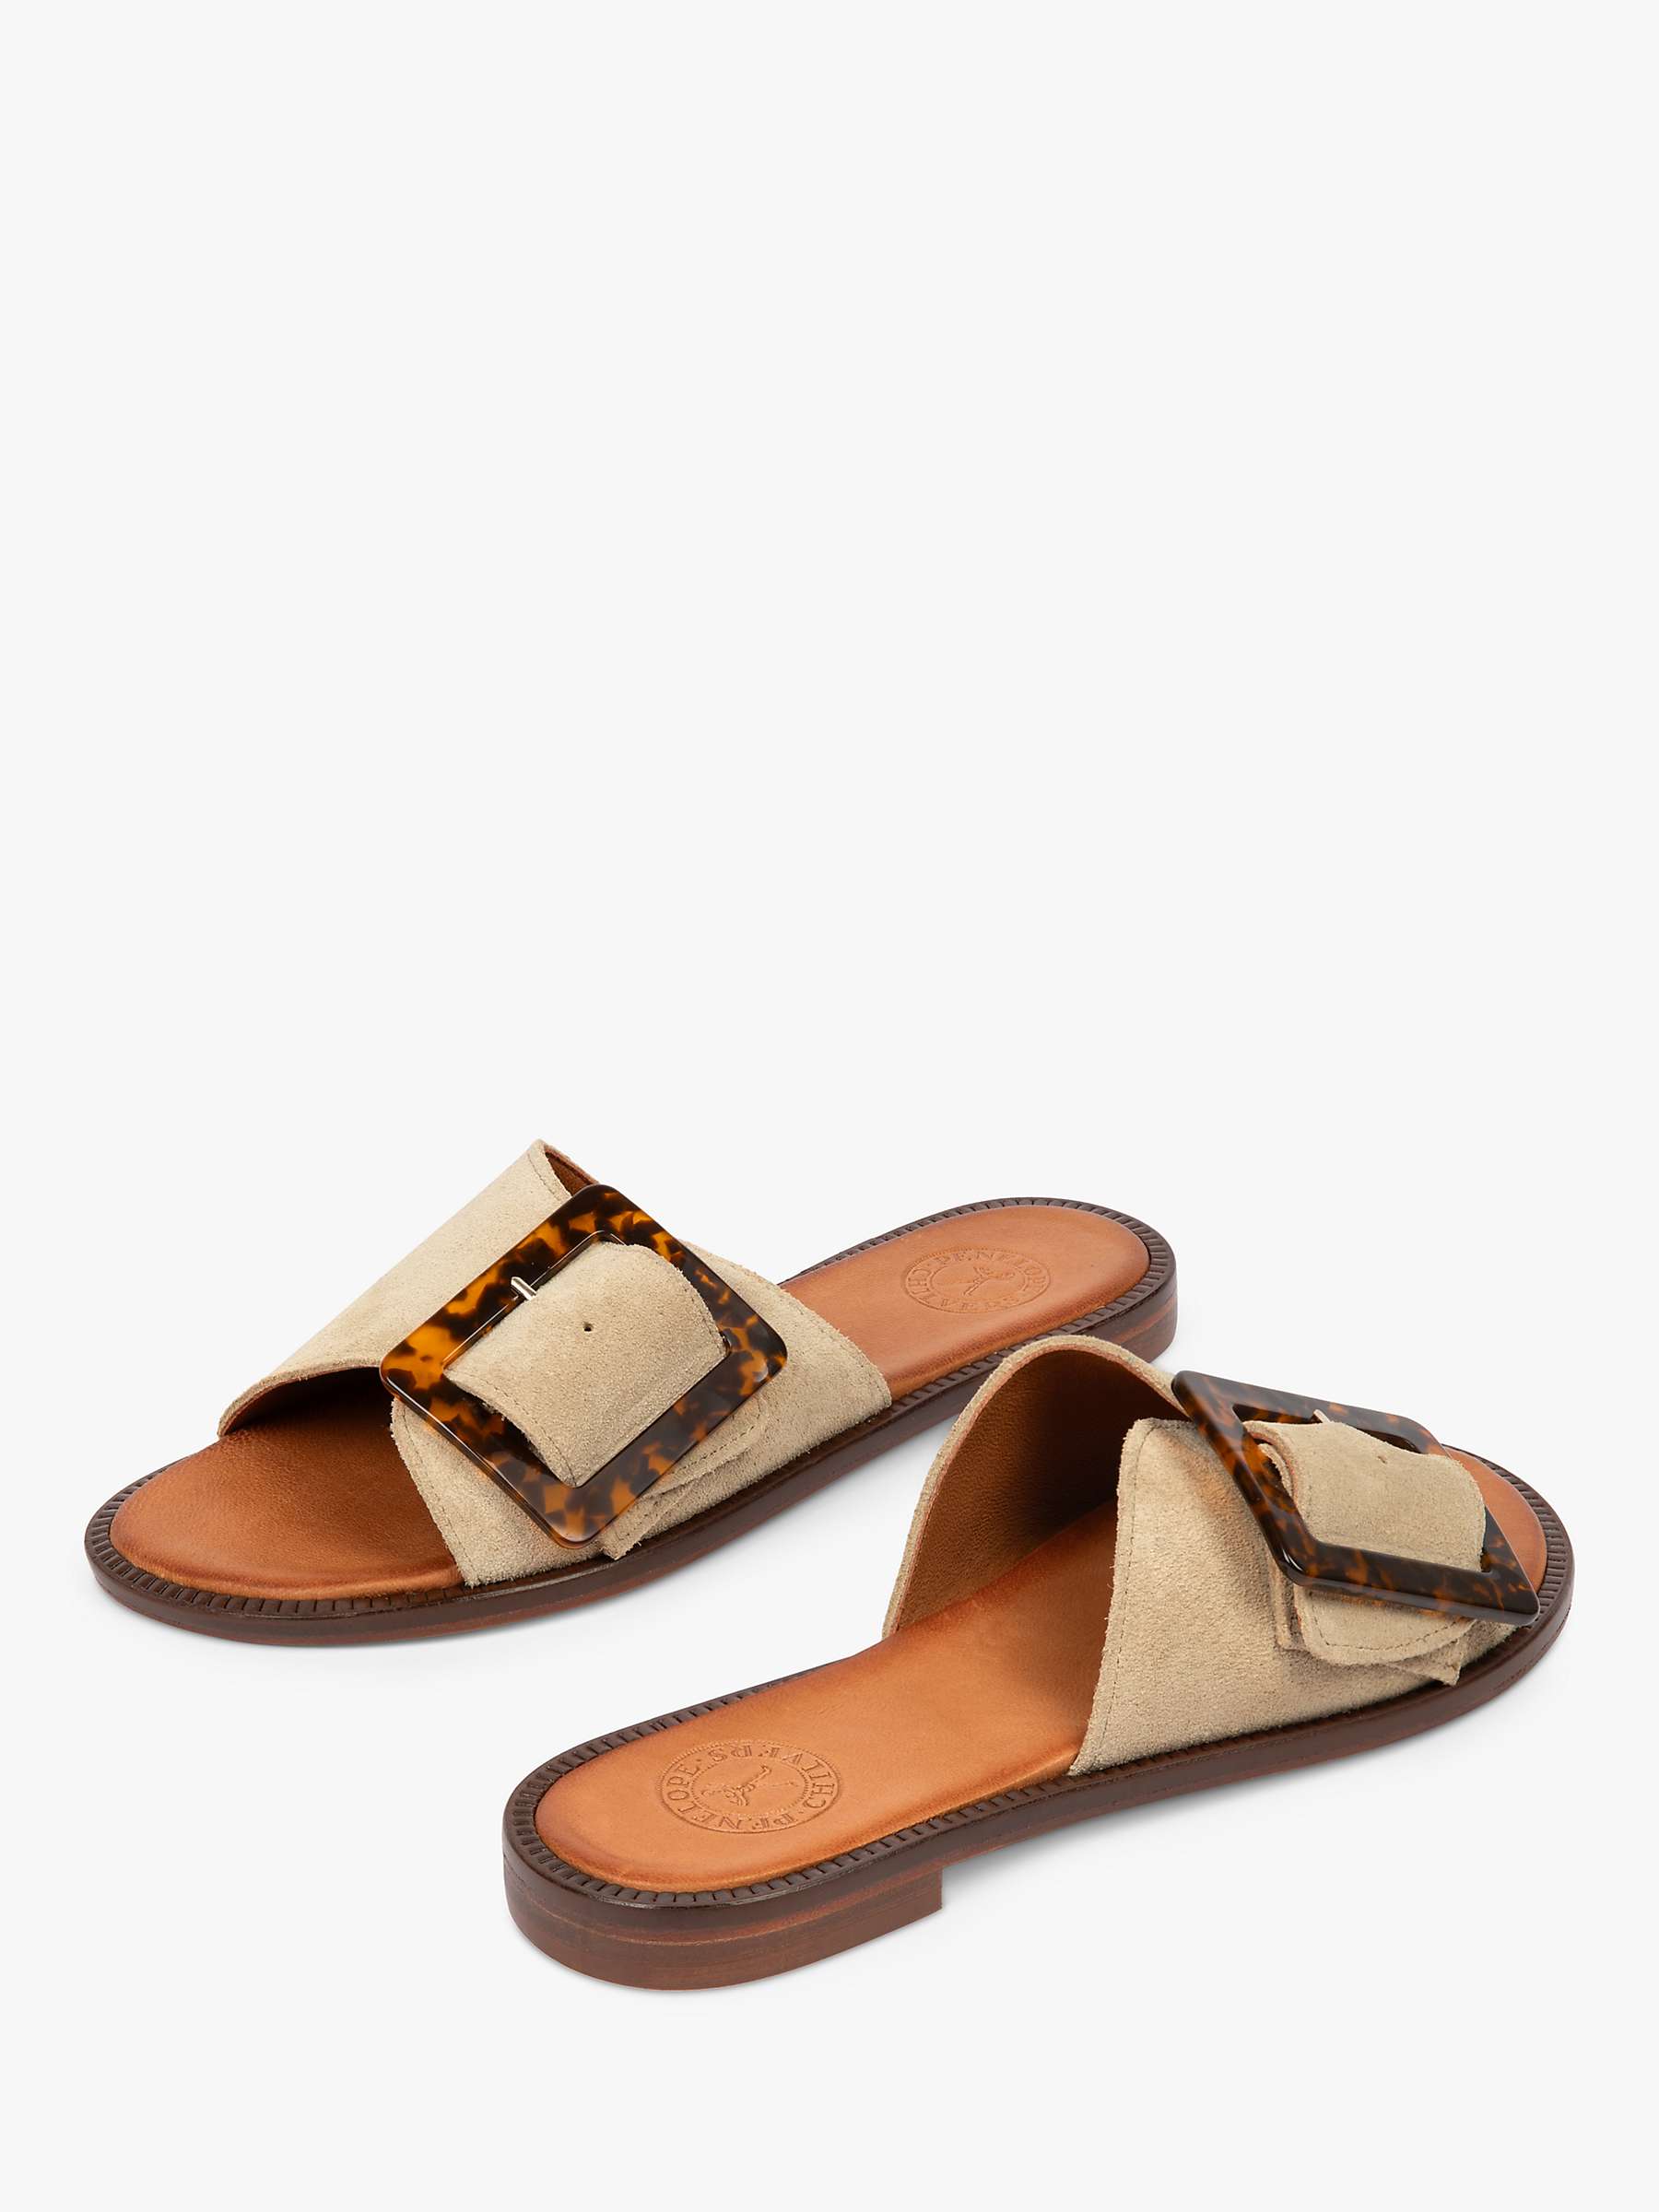 Buy Penelope Chilvers Biarritz Suede Buckle Sandals, Taupe Online at johnlewis.com